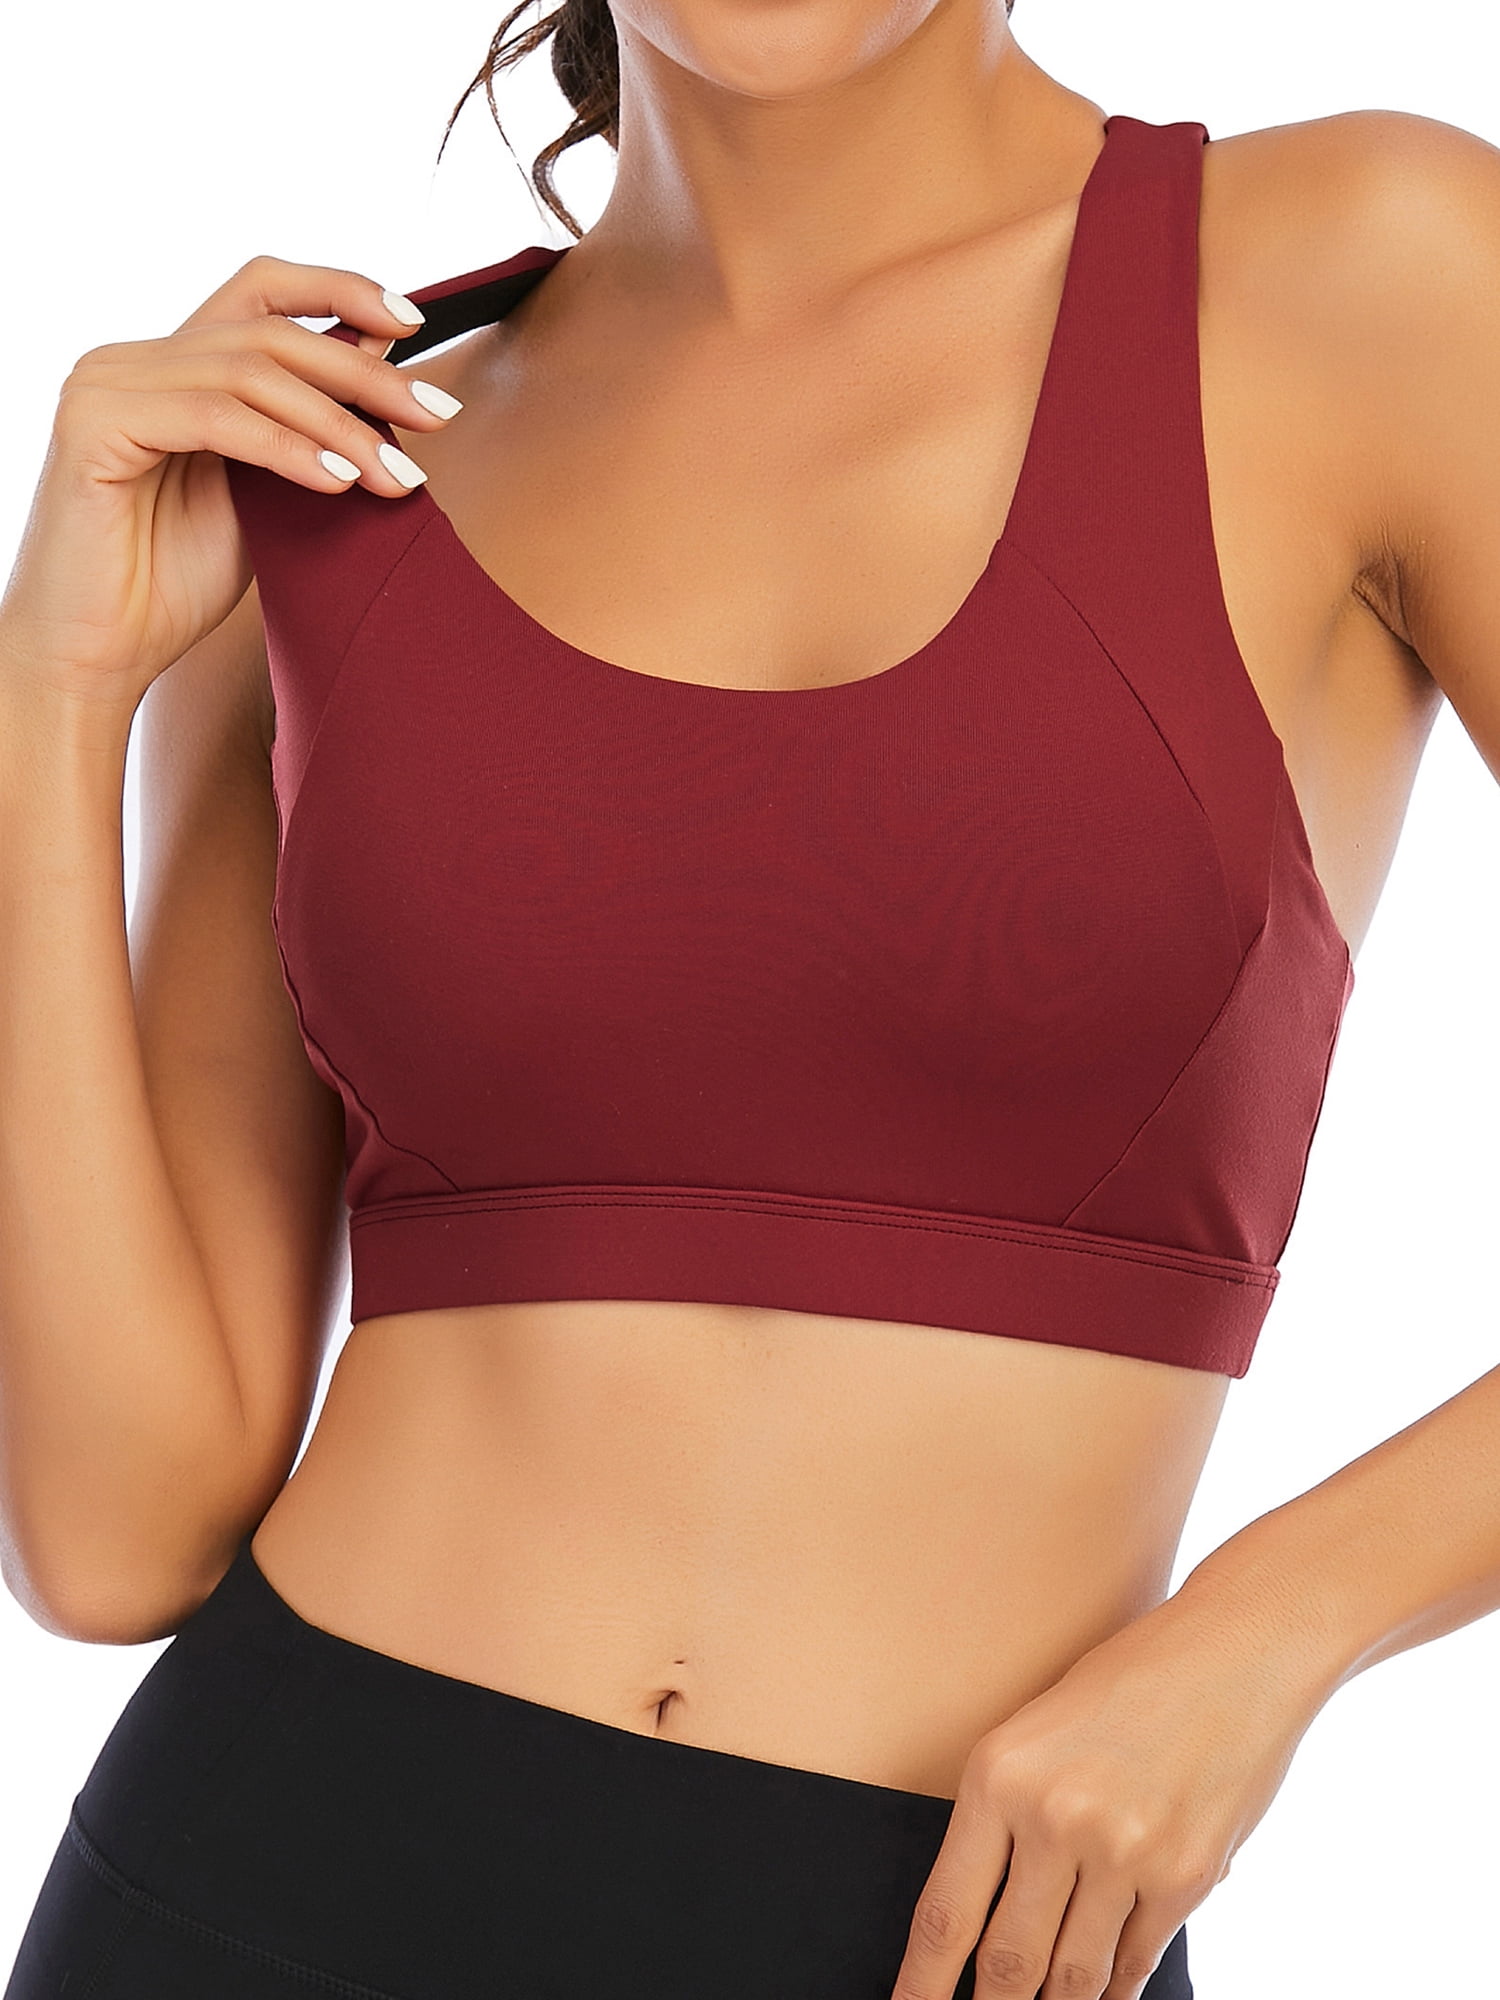 Camisoles Sports Bra for Women, Medium Support Yoga Bra Criss-Cross Back  Padded Strappy Sports Bras with Removable Cups 